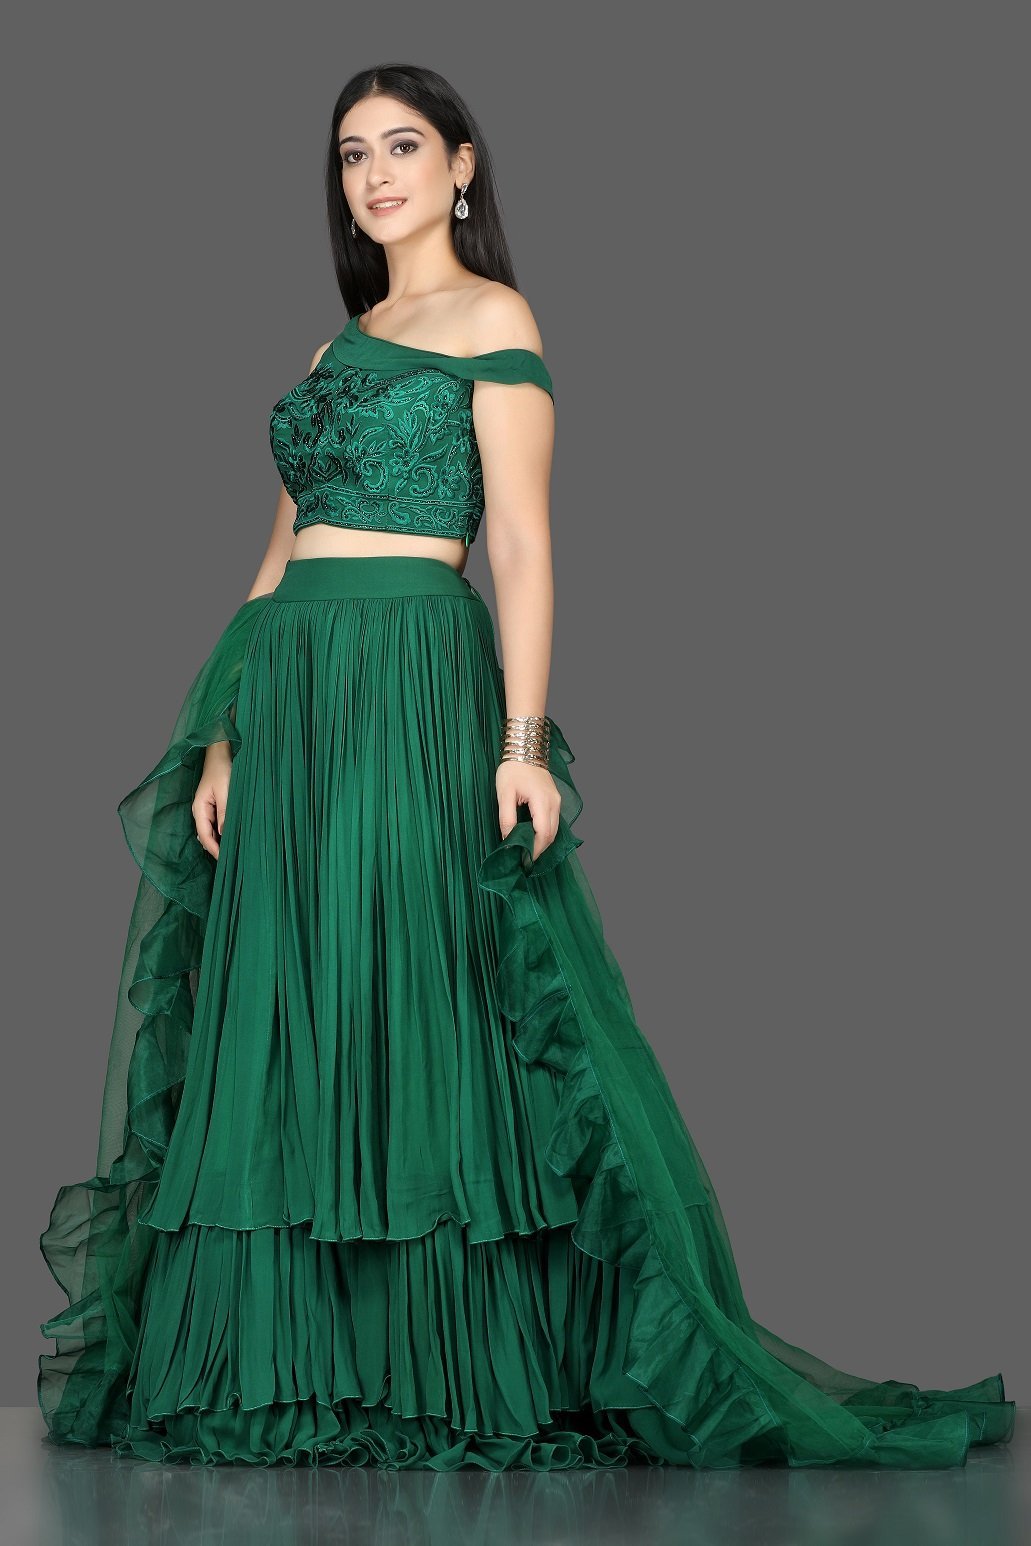 Buy stylish bottle green georgette layered lehenga online in USA with ruffle dupatta. Flaunt ethnic fashion with exquisite designer lehenga, Indian wedding dresses from Pure Elegance Indian fashion boutique in USA.-side